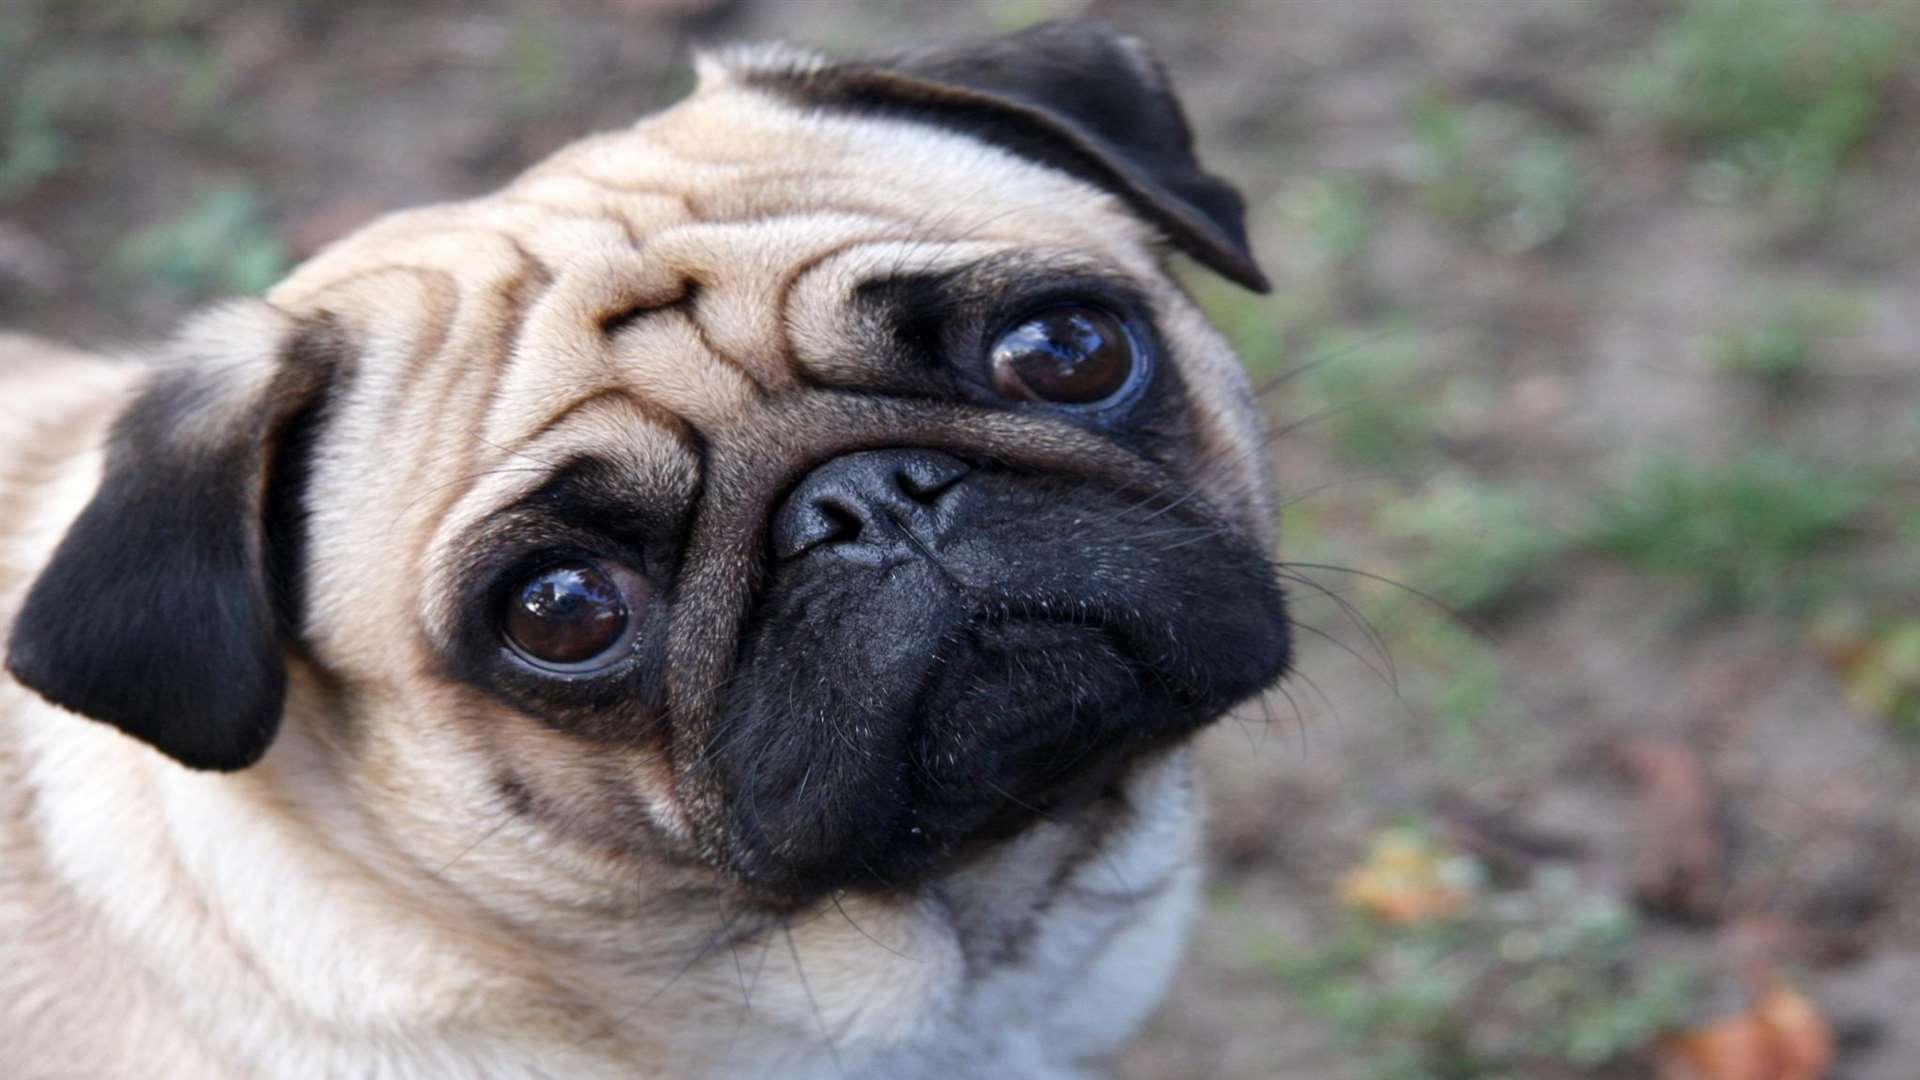 A pug. Library image.